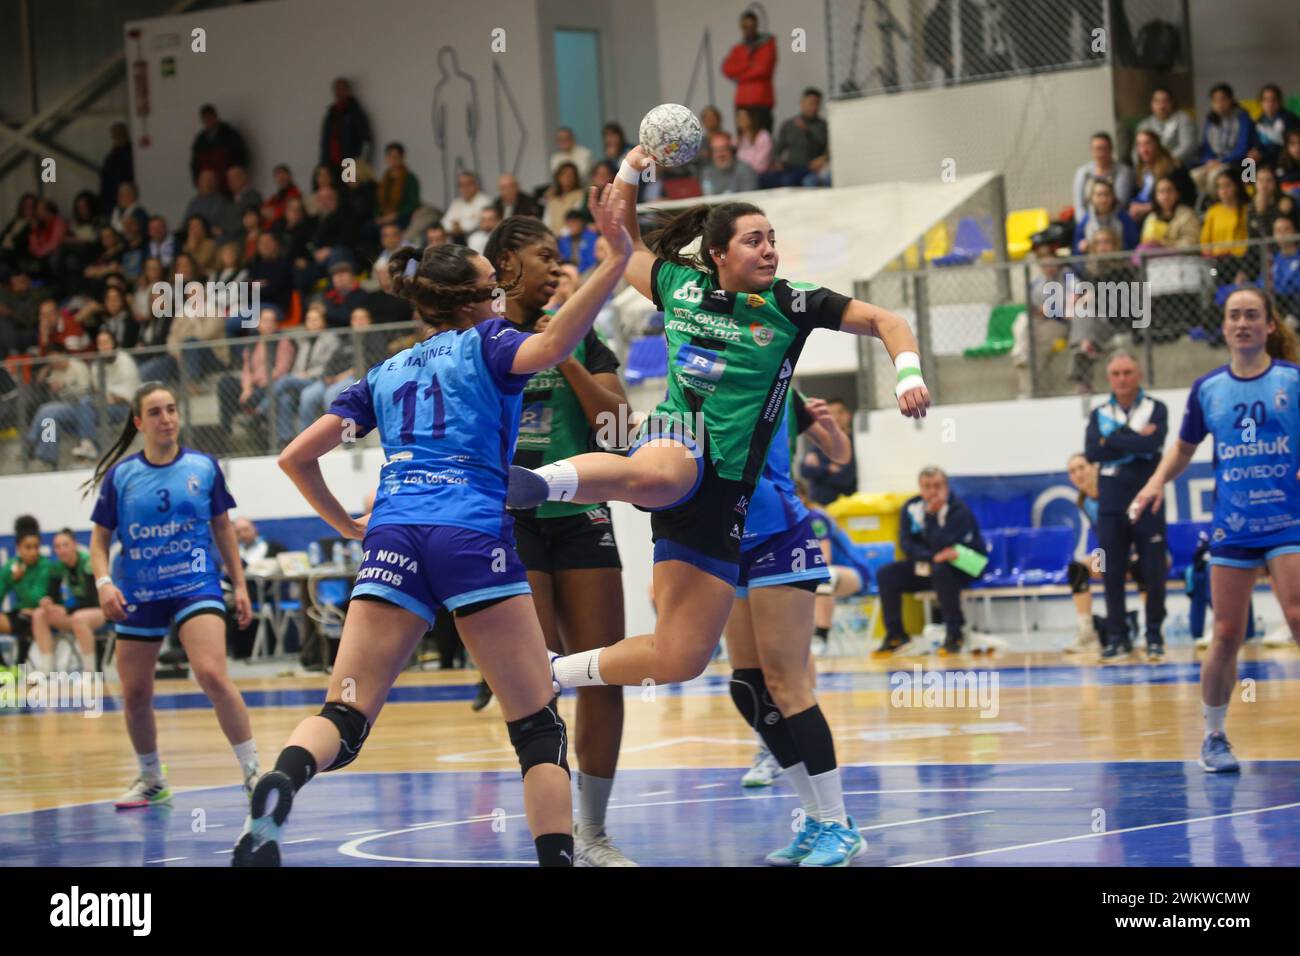 Oviedo, Spain, 22th February 2024: Replasa Beti-Onak player, Nerea Canas (88) shoots on goal against several rivals during the 19th Matchday of the Liga Guerreras Iberdrola 2023-24 between Lobas Global Atac Oviedo and Replasa Beti-Onak Onak, on February 22, 2023, at the Florida Arena Municipal Sports Center, in Oviedo, Spain. Credit: Alberto Brevers / Alamy Live News. Stock Photo